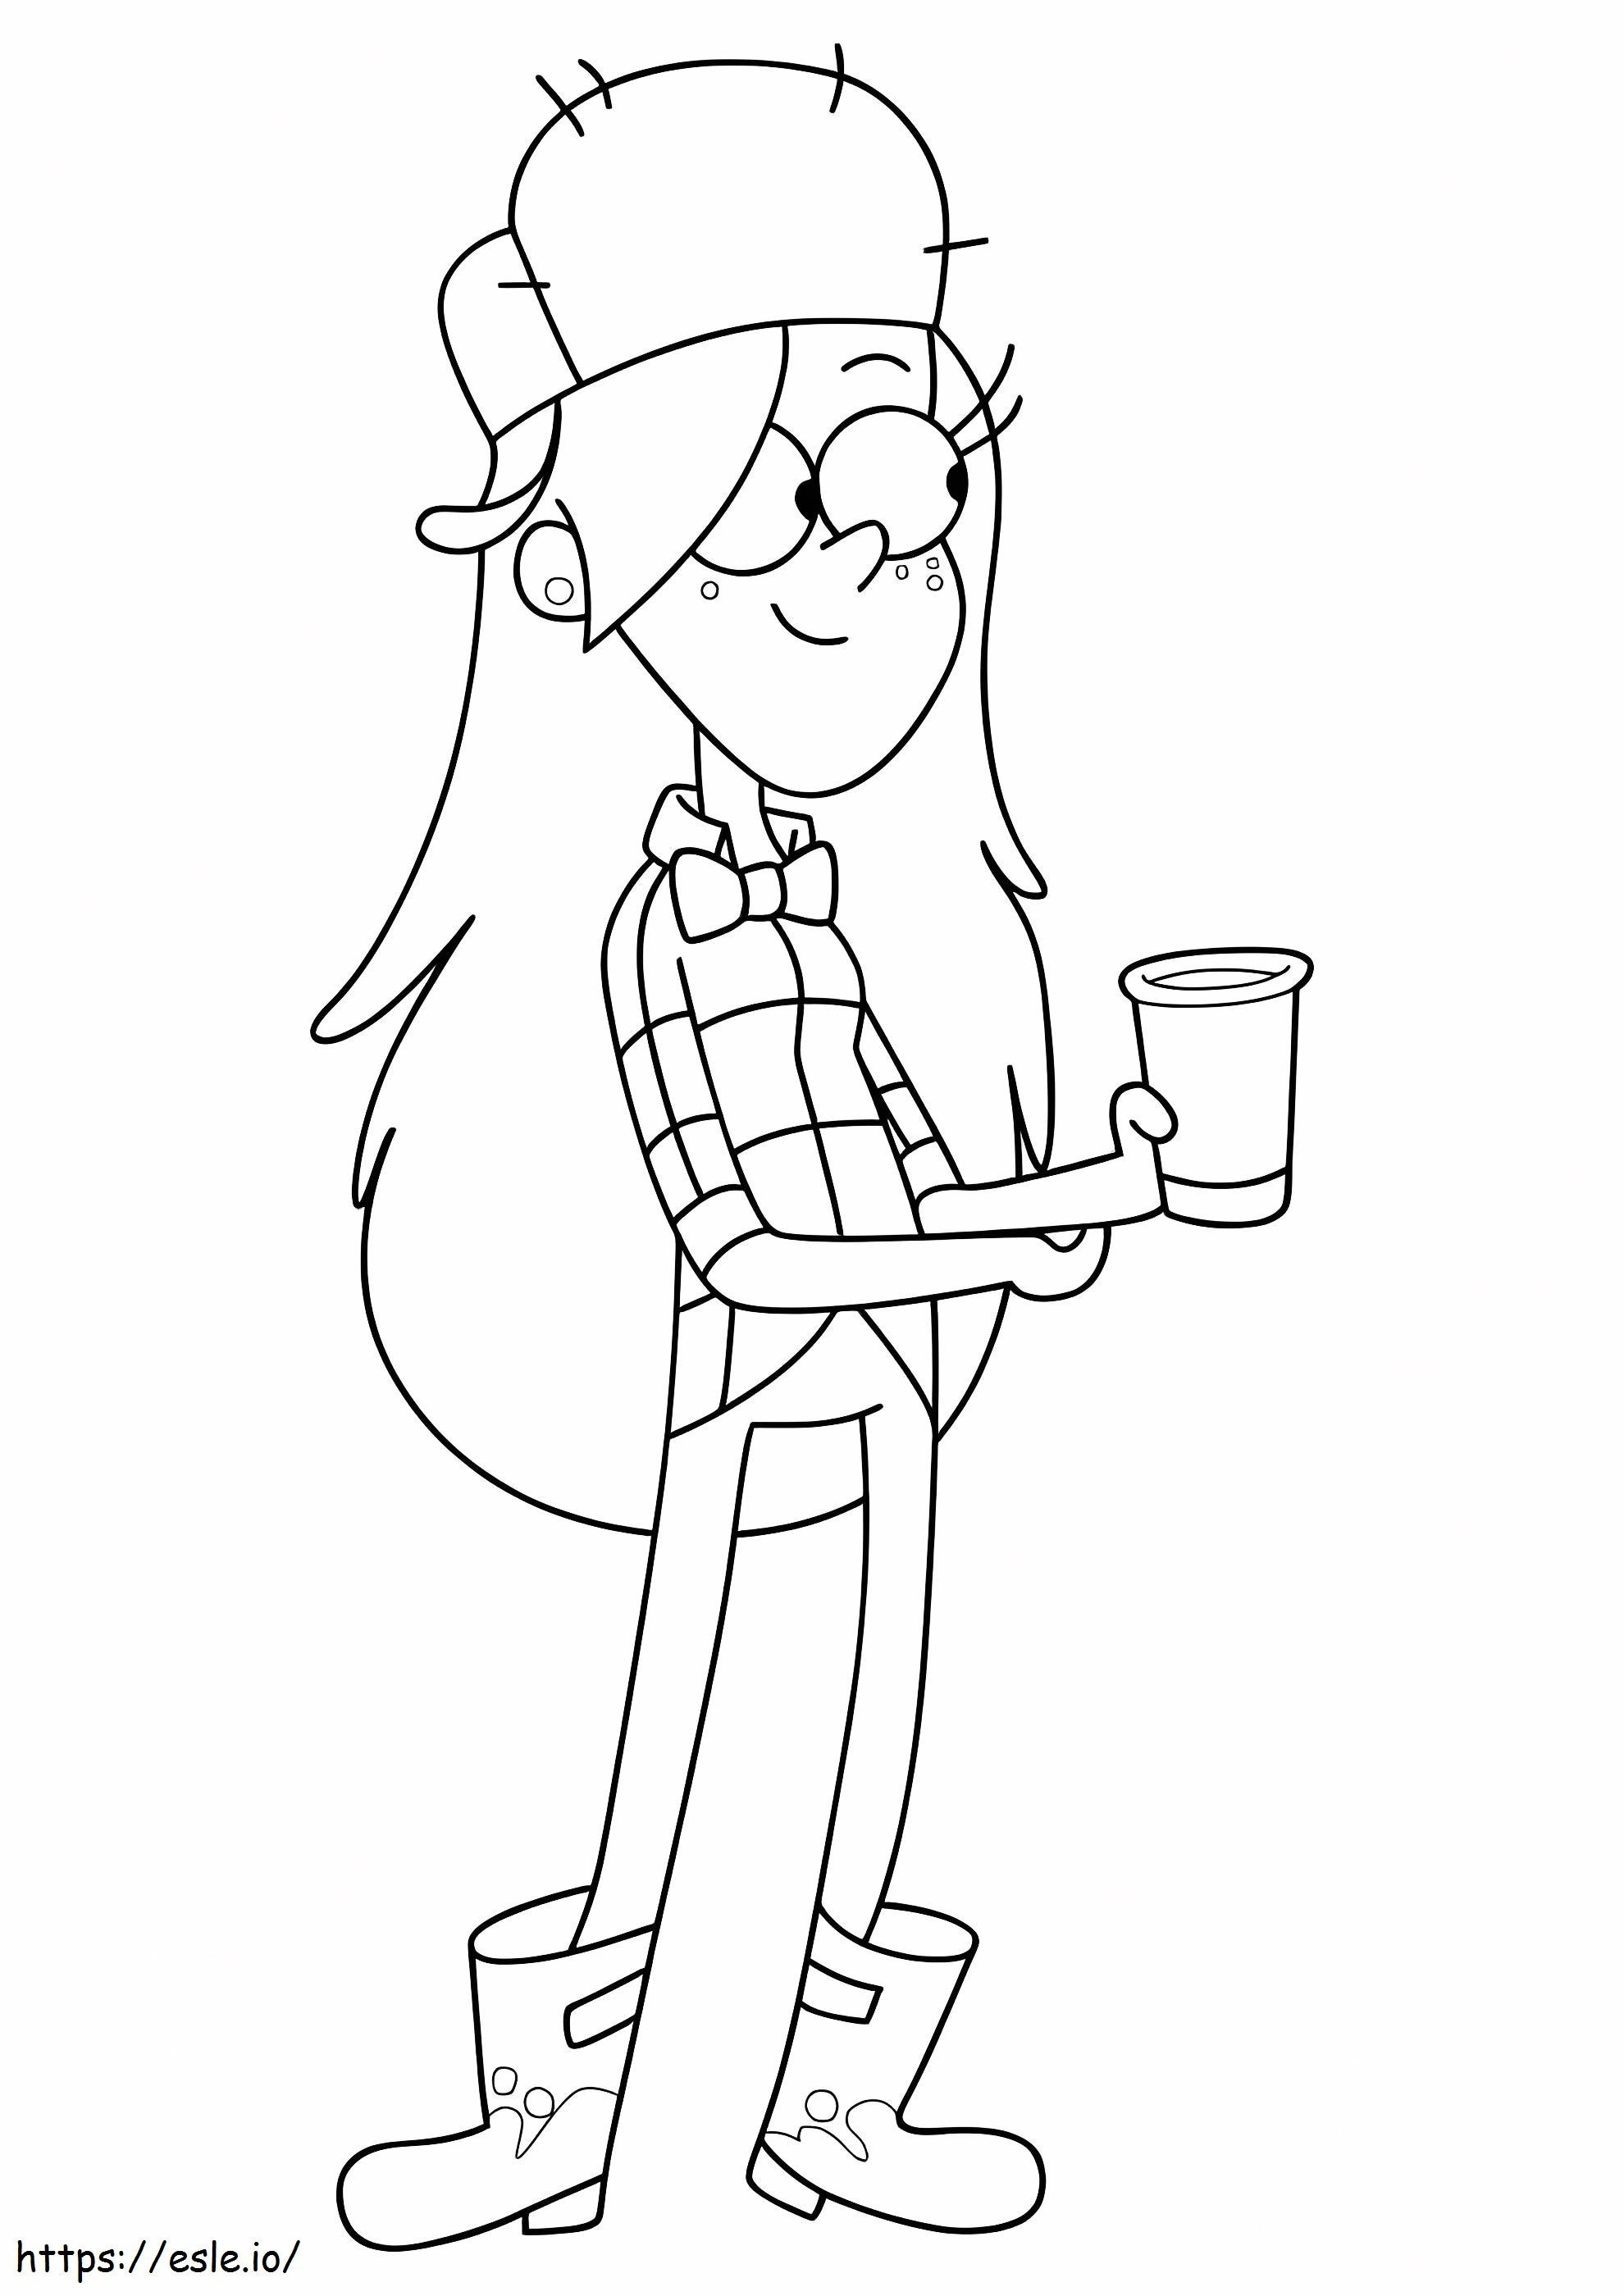 Wendy Holding A Cup Of Coffee coloring page